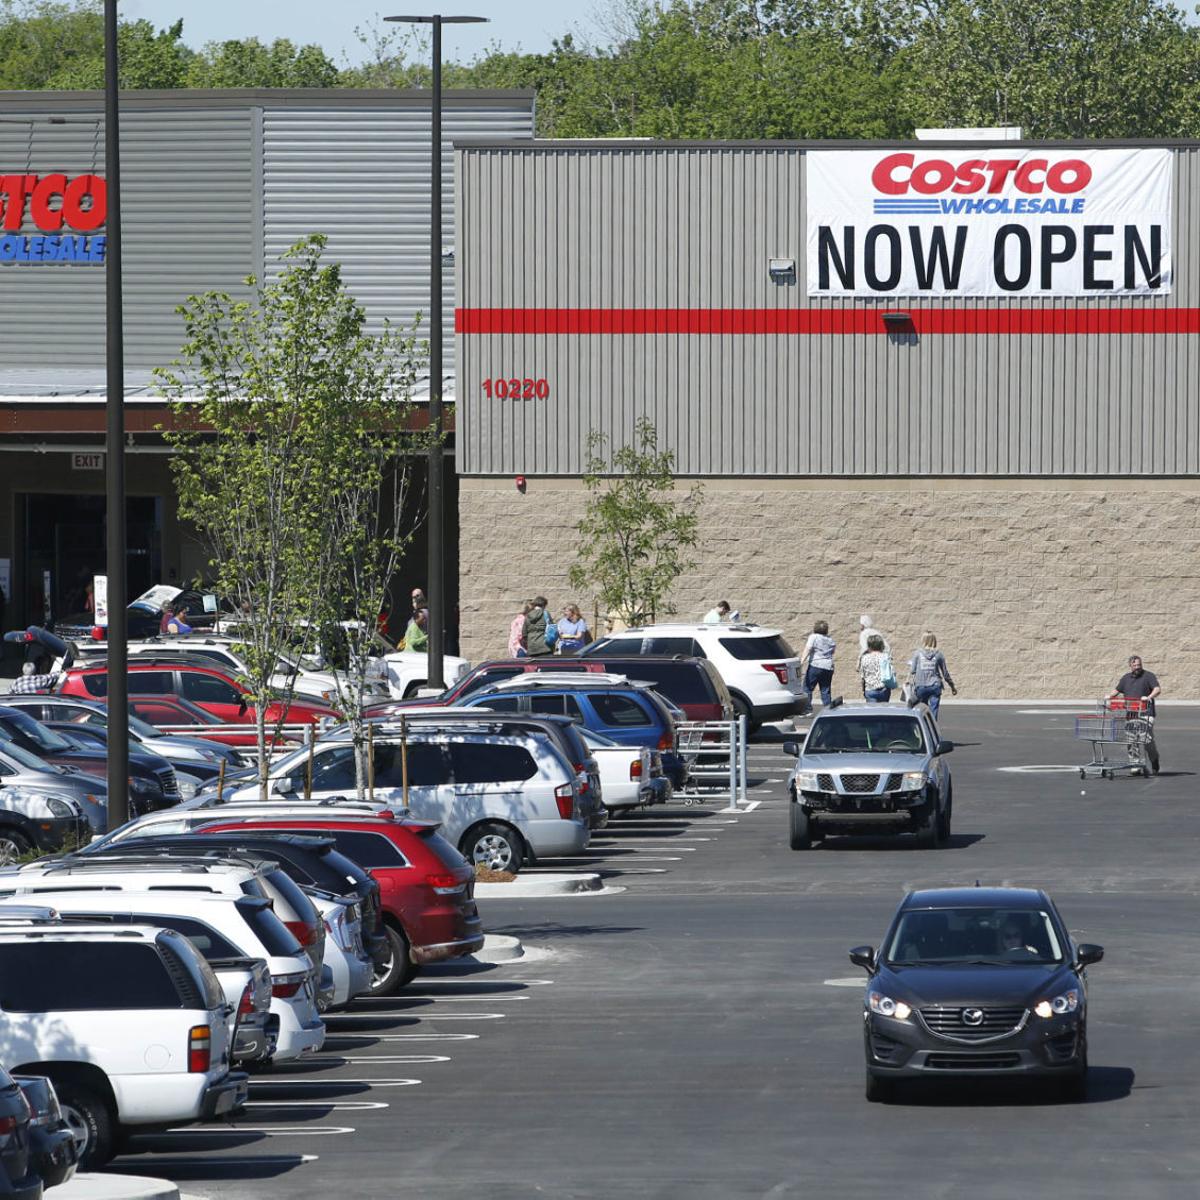 Second Costco Store In Works For Tulsa City Says Local Business News Tulsaworldcom